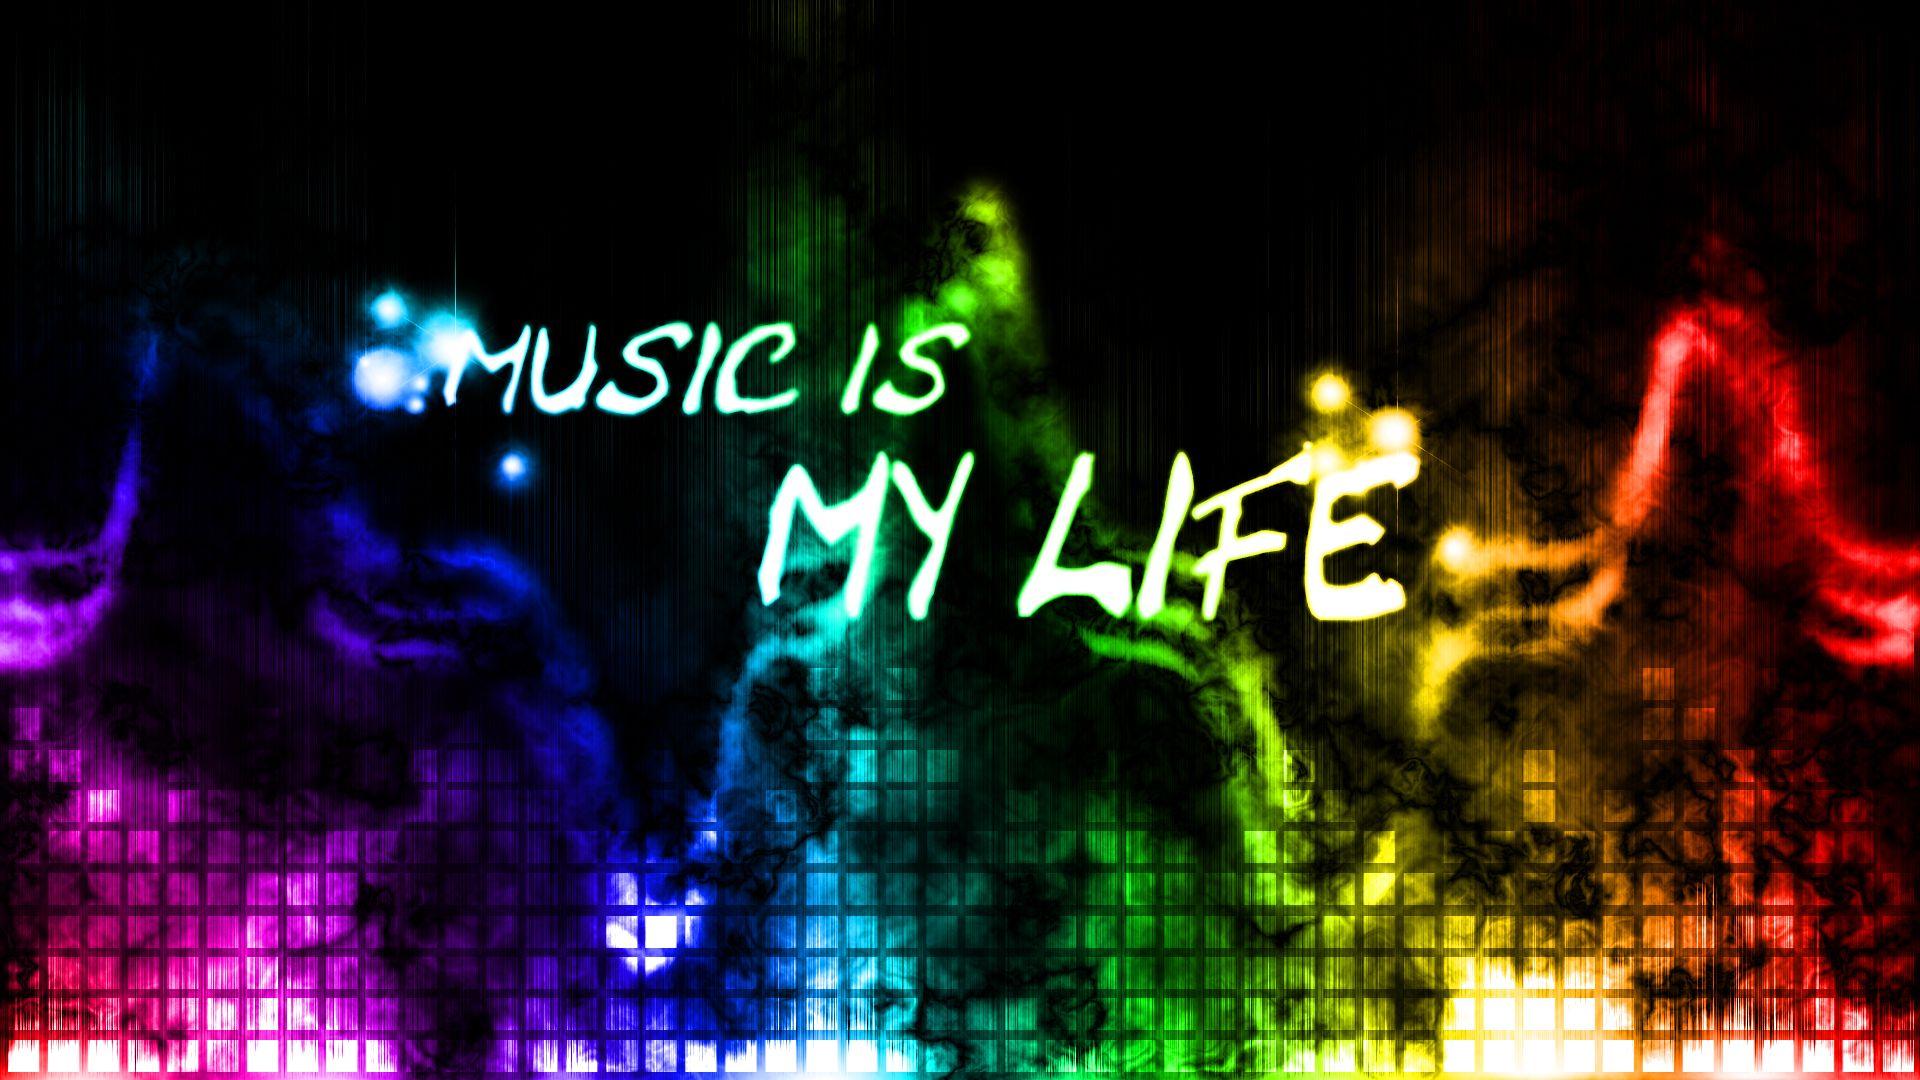 Music Is My Life Wallpaper, Music Is My Life Wallpaper for Desktop